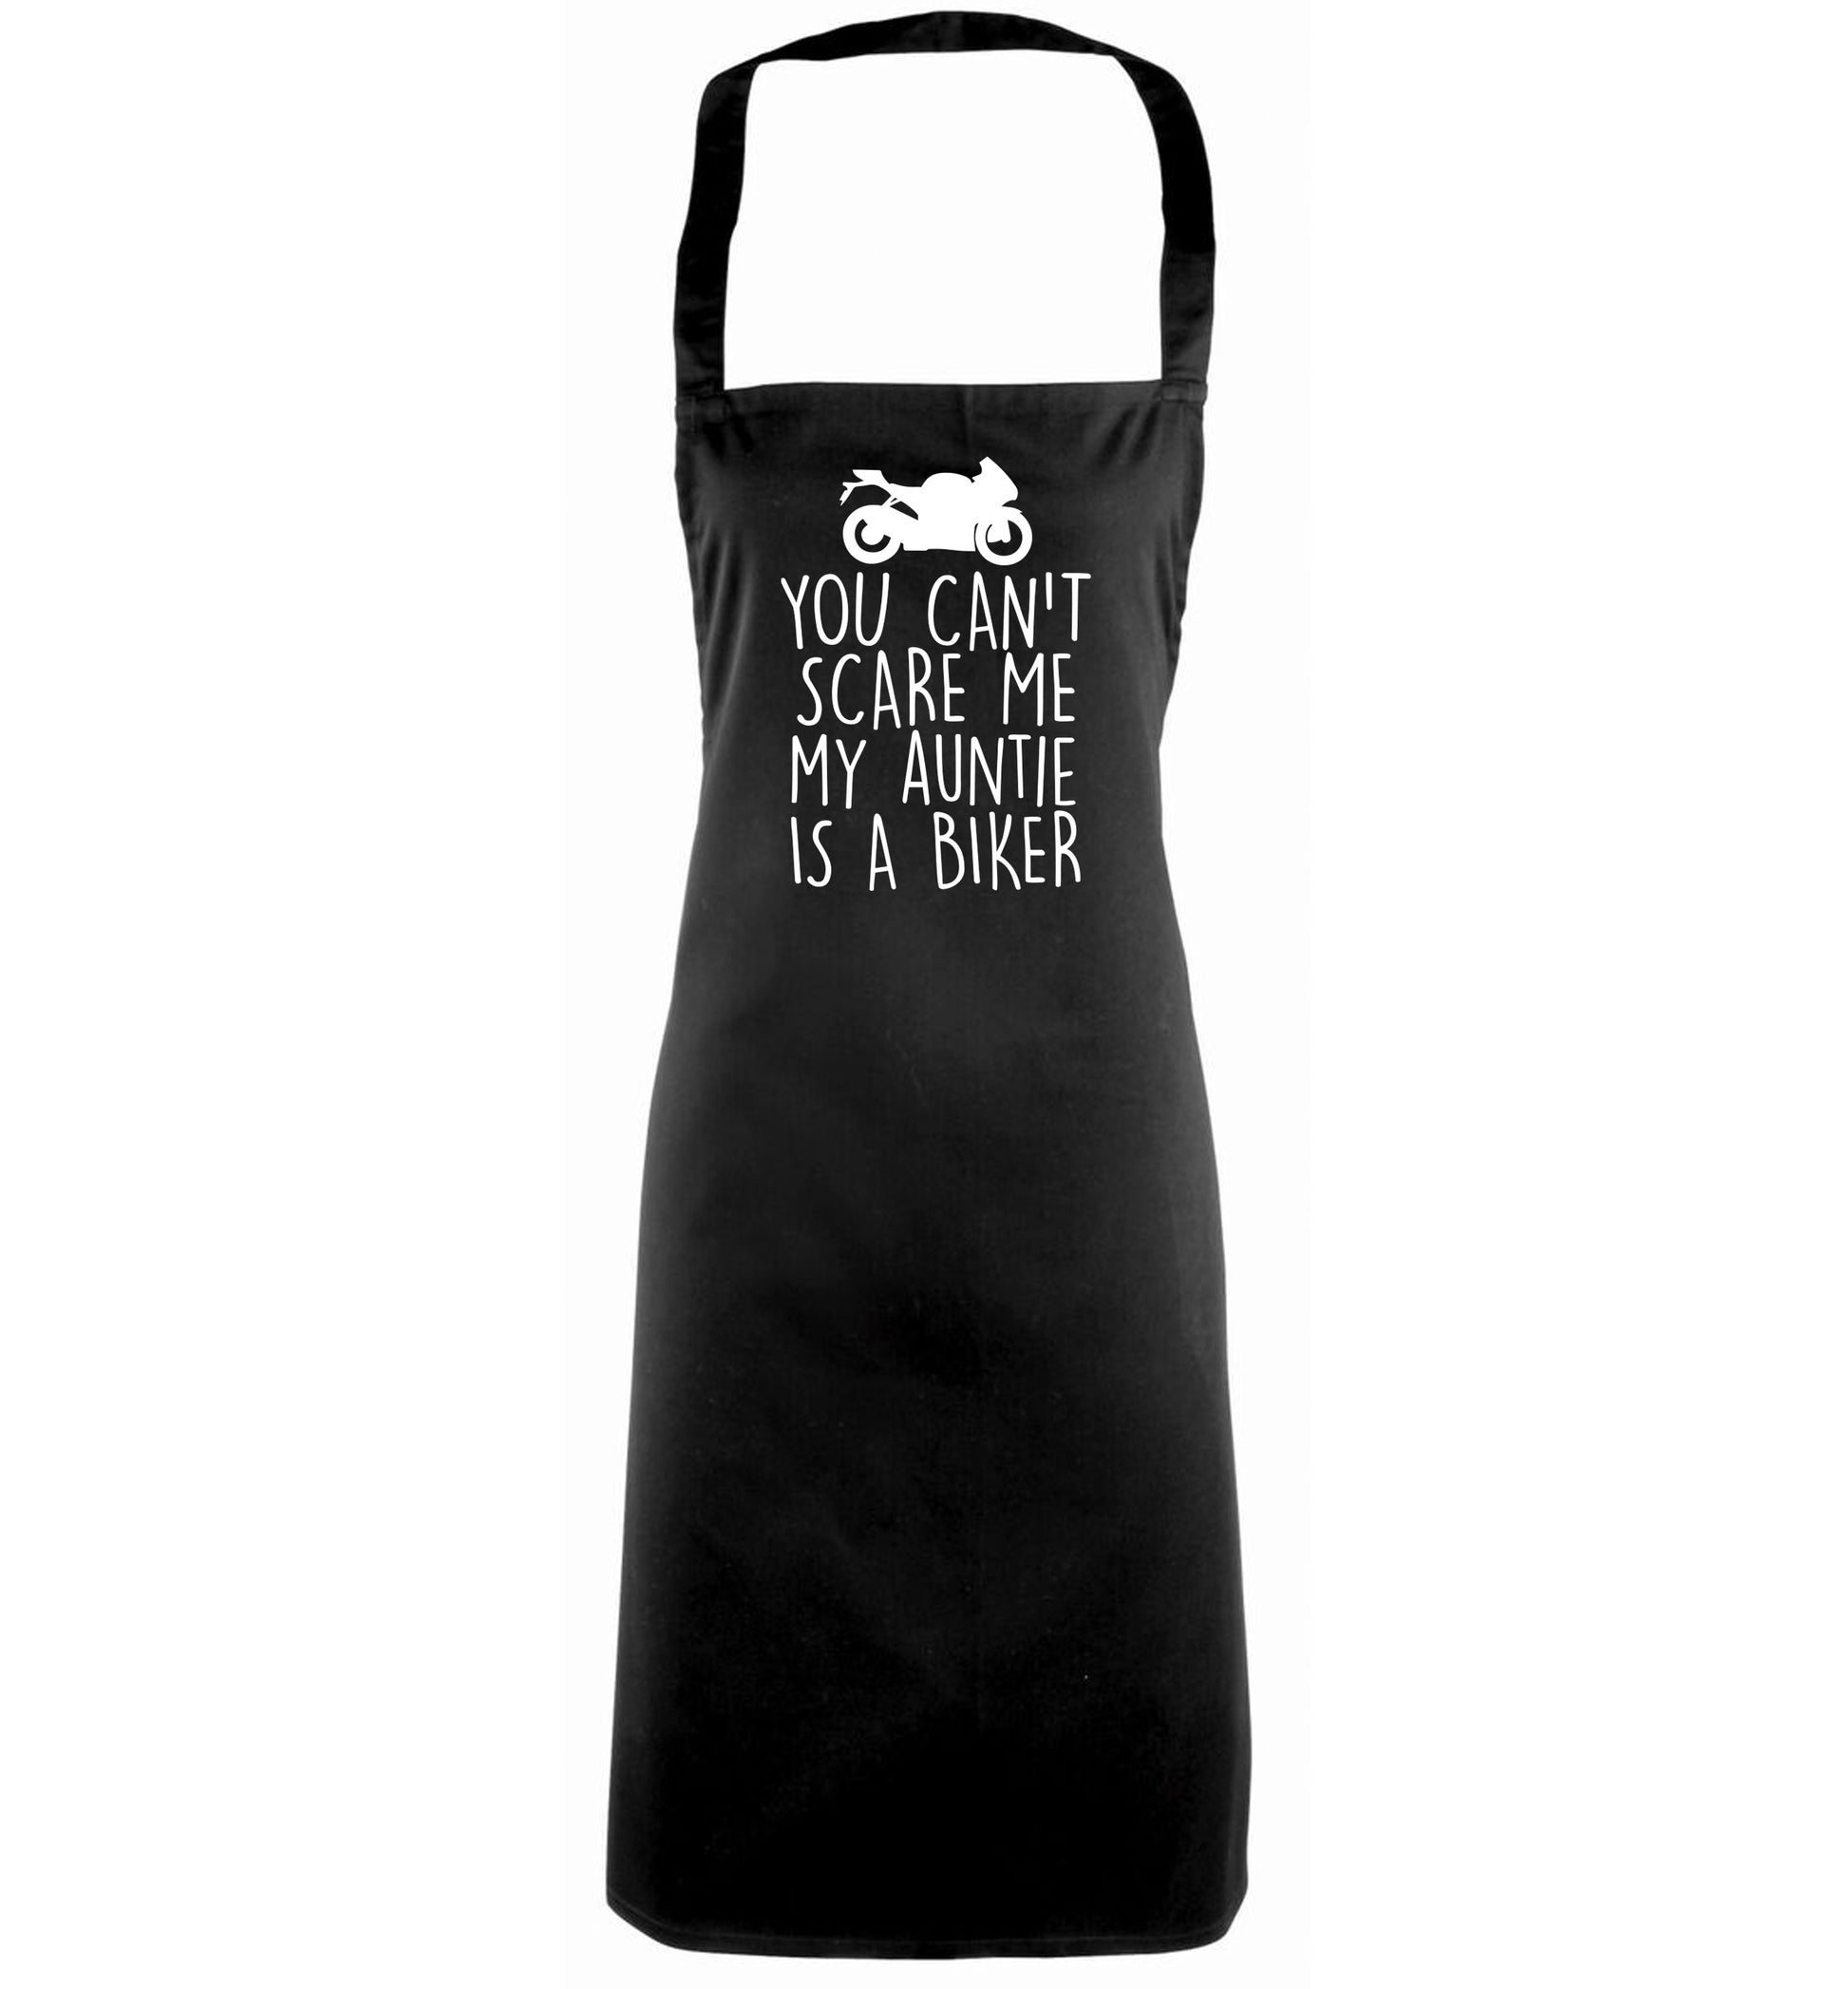 You can't scare me my auntie is a biker black apron